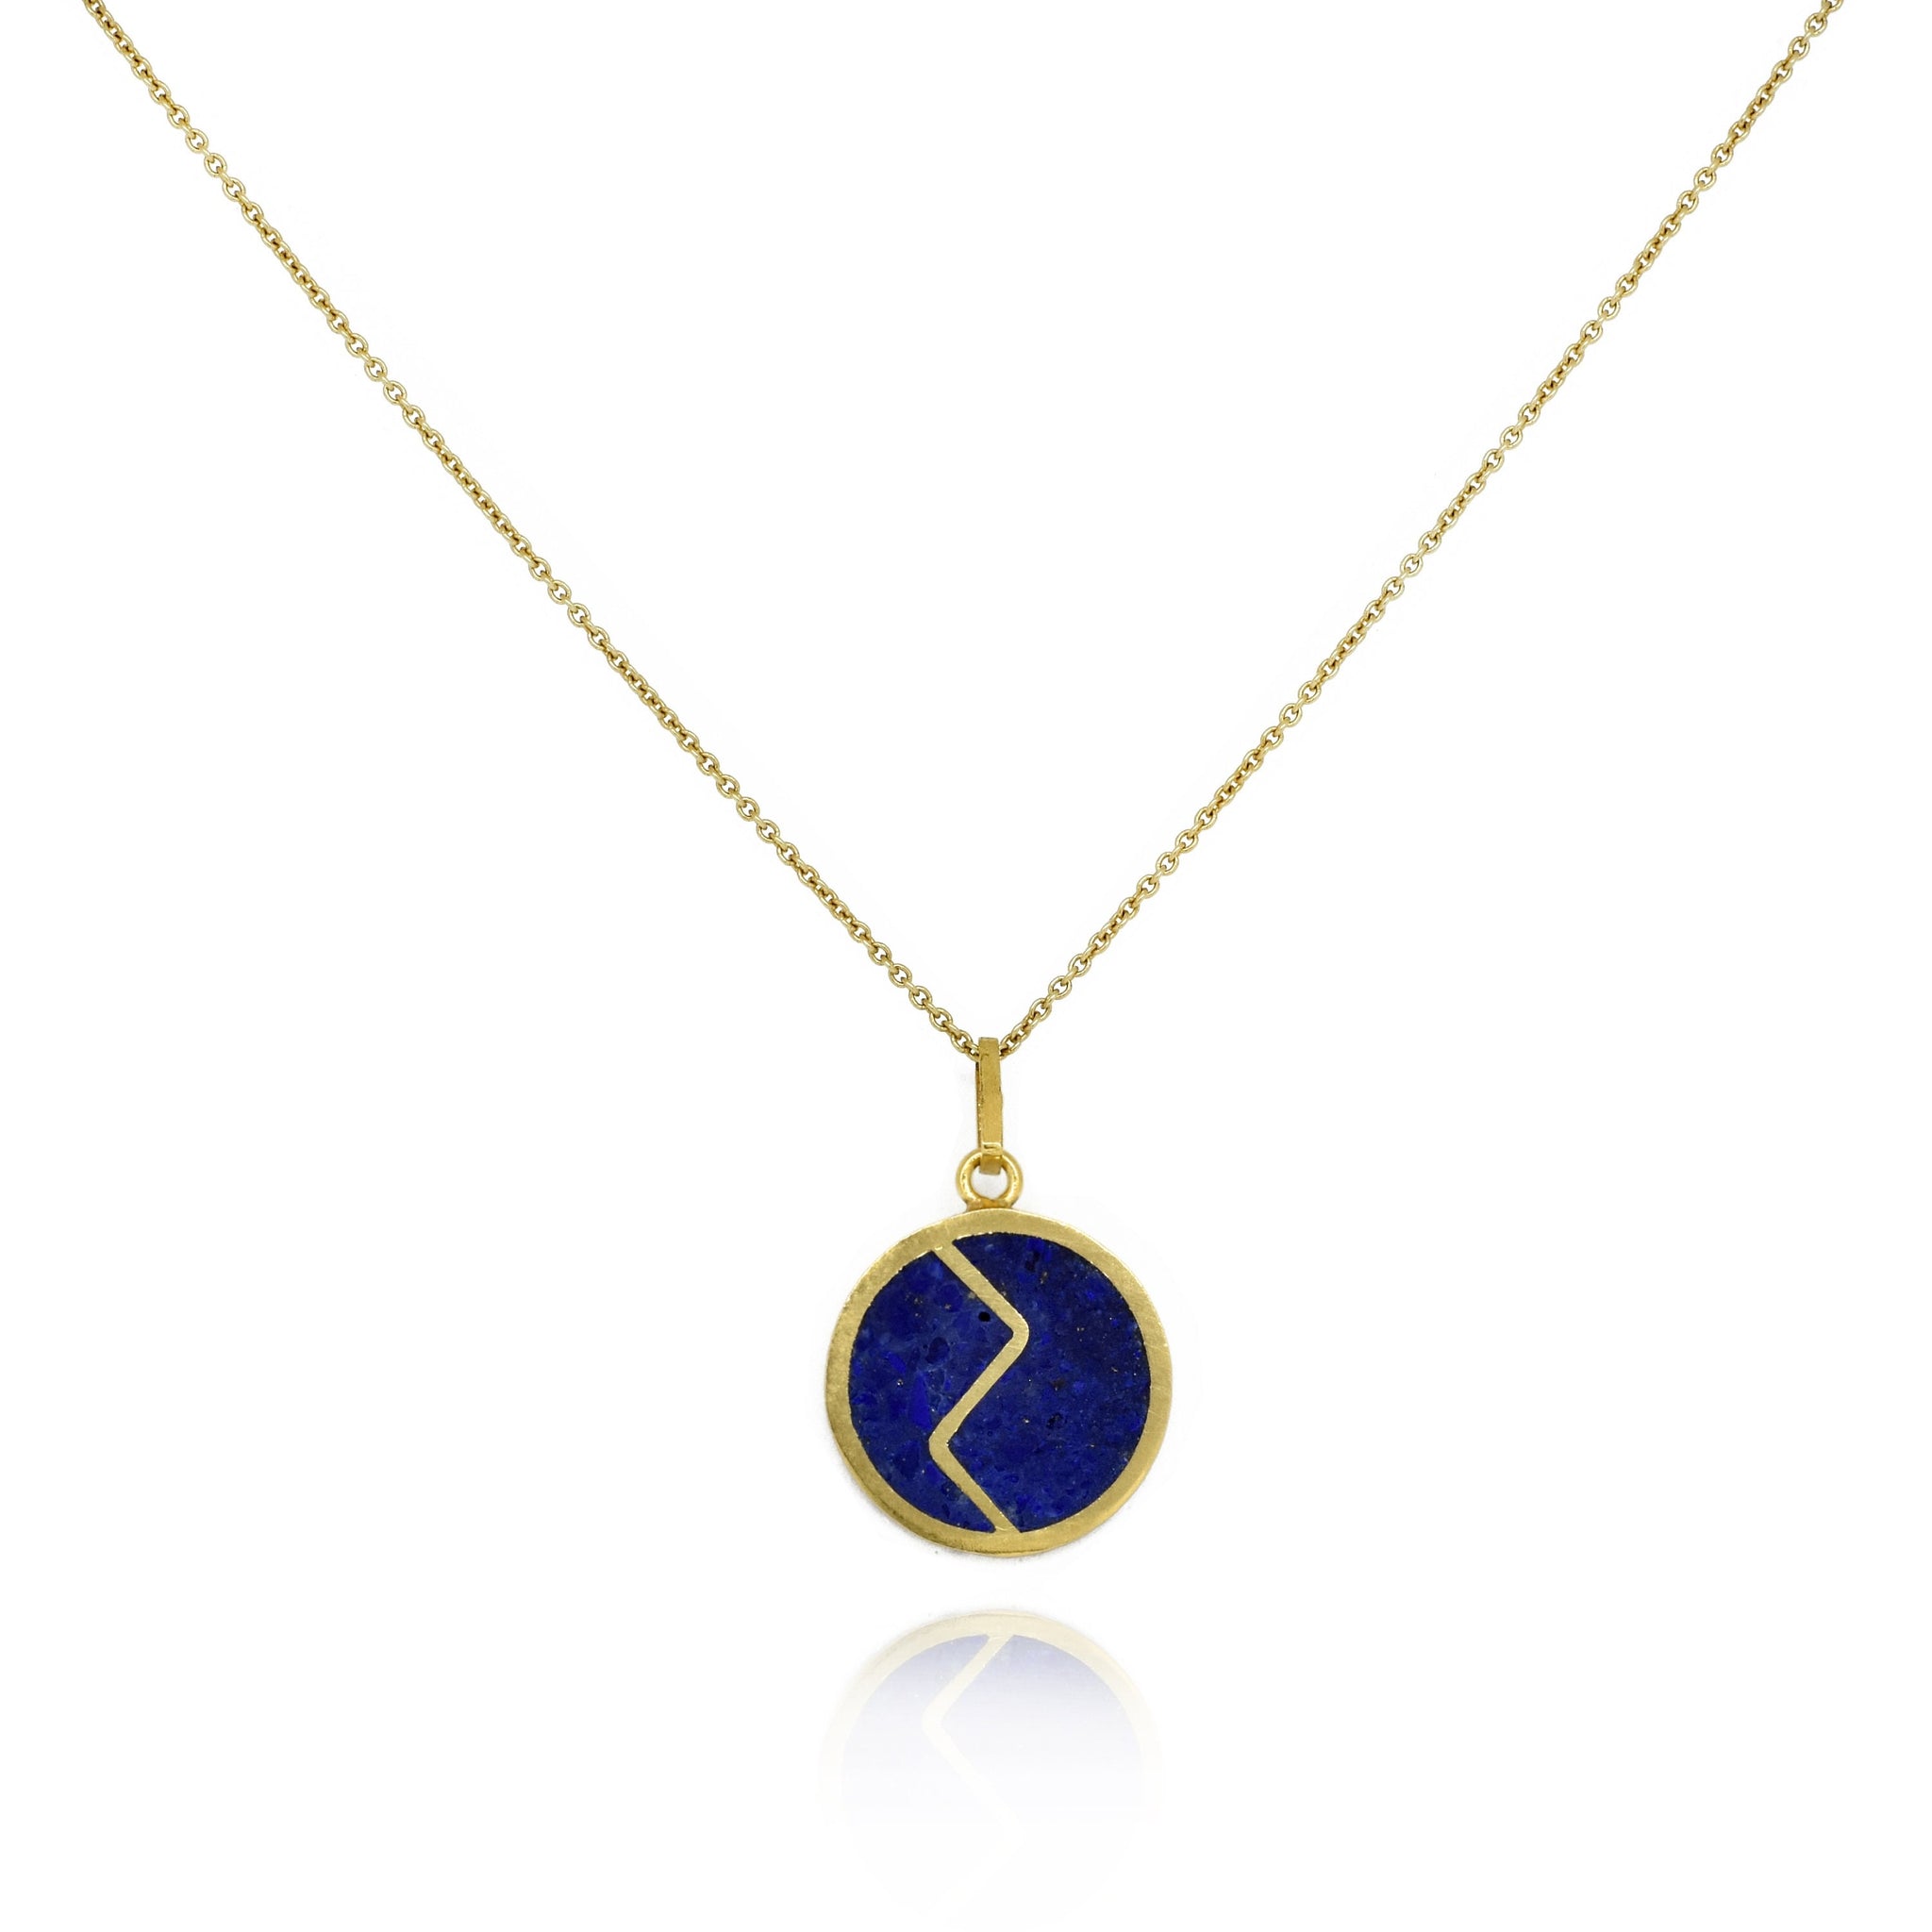 Handmade Afghan Blue Gemstone Lapis Lazuli Drop Gold Chain Pendant Necklace Elegant Inspired Jewelry Boho Chic Ear Accessories Gift for Her